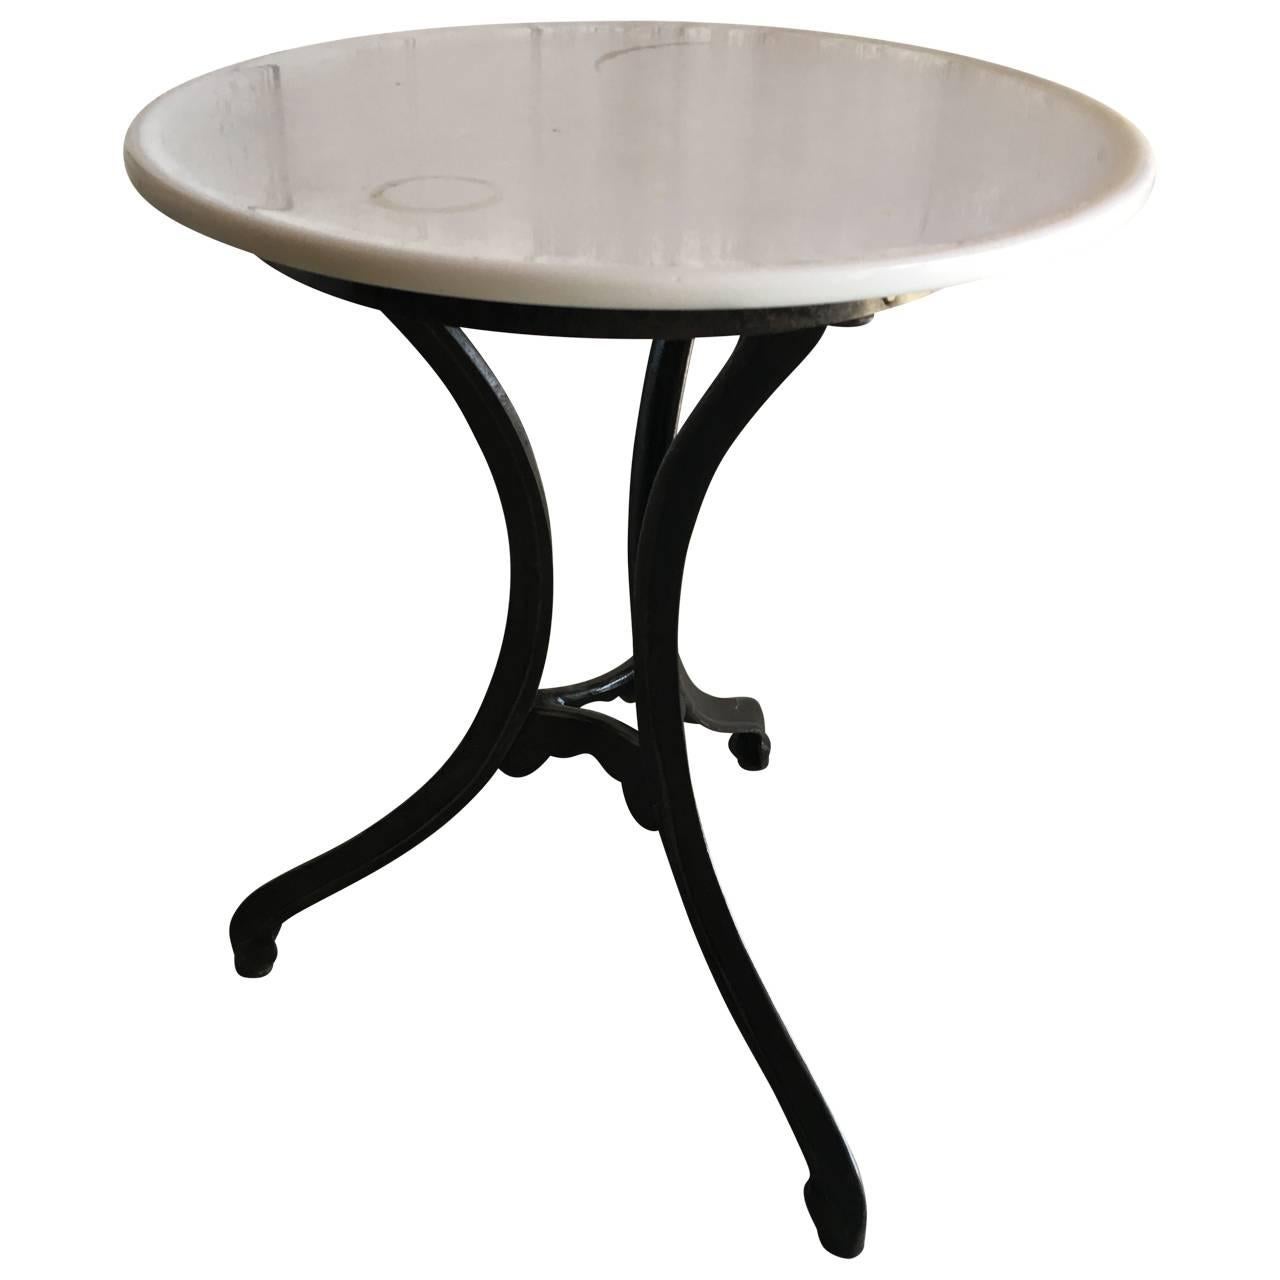 American Early 20th Century Fountain Table with Opaque Tabletop